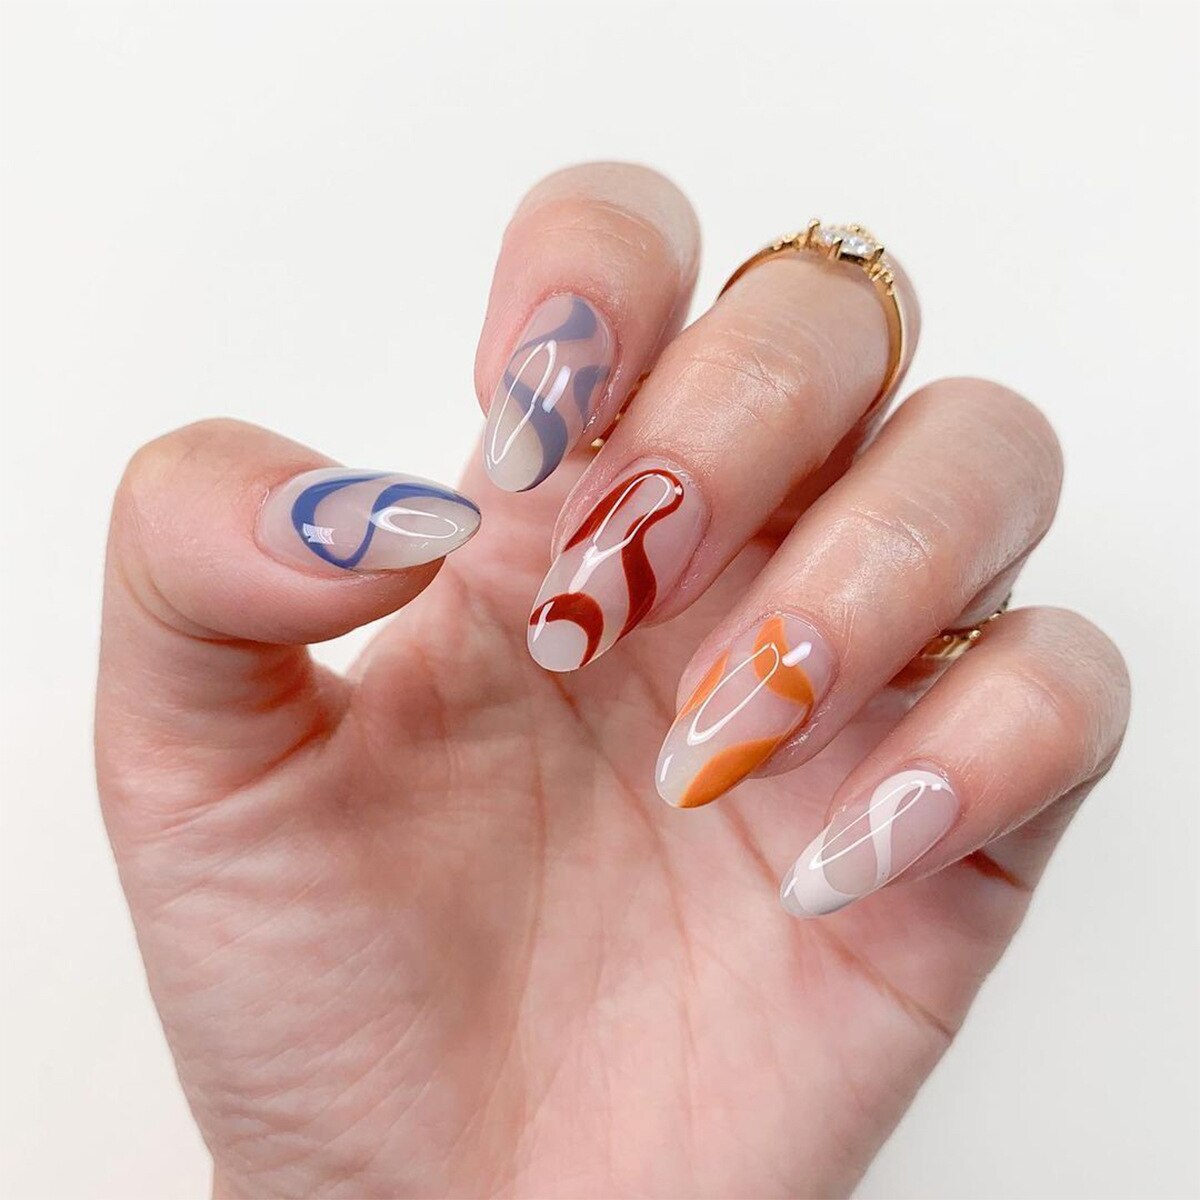 Nails With Glue-1413